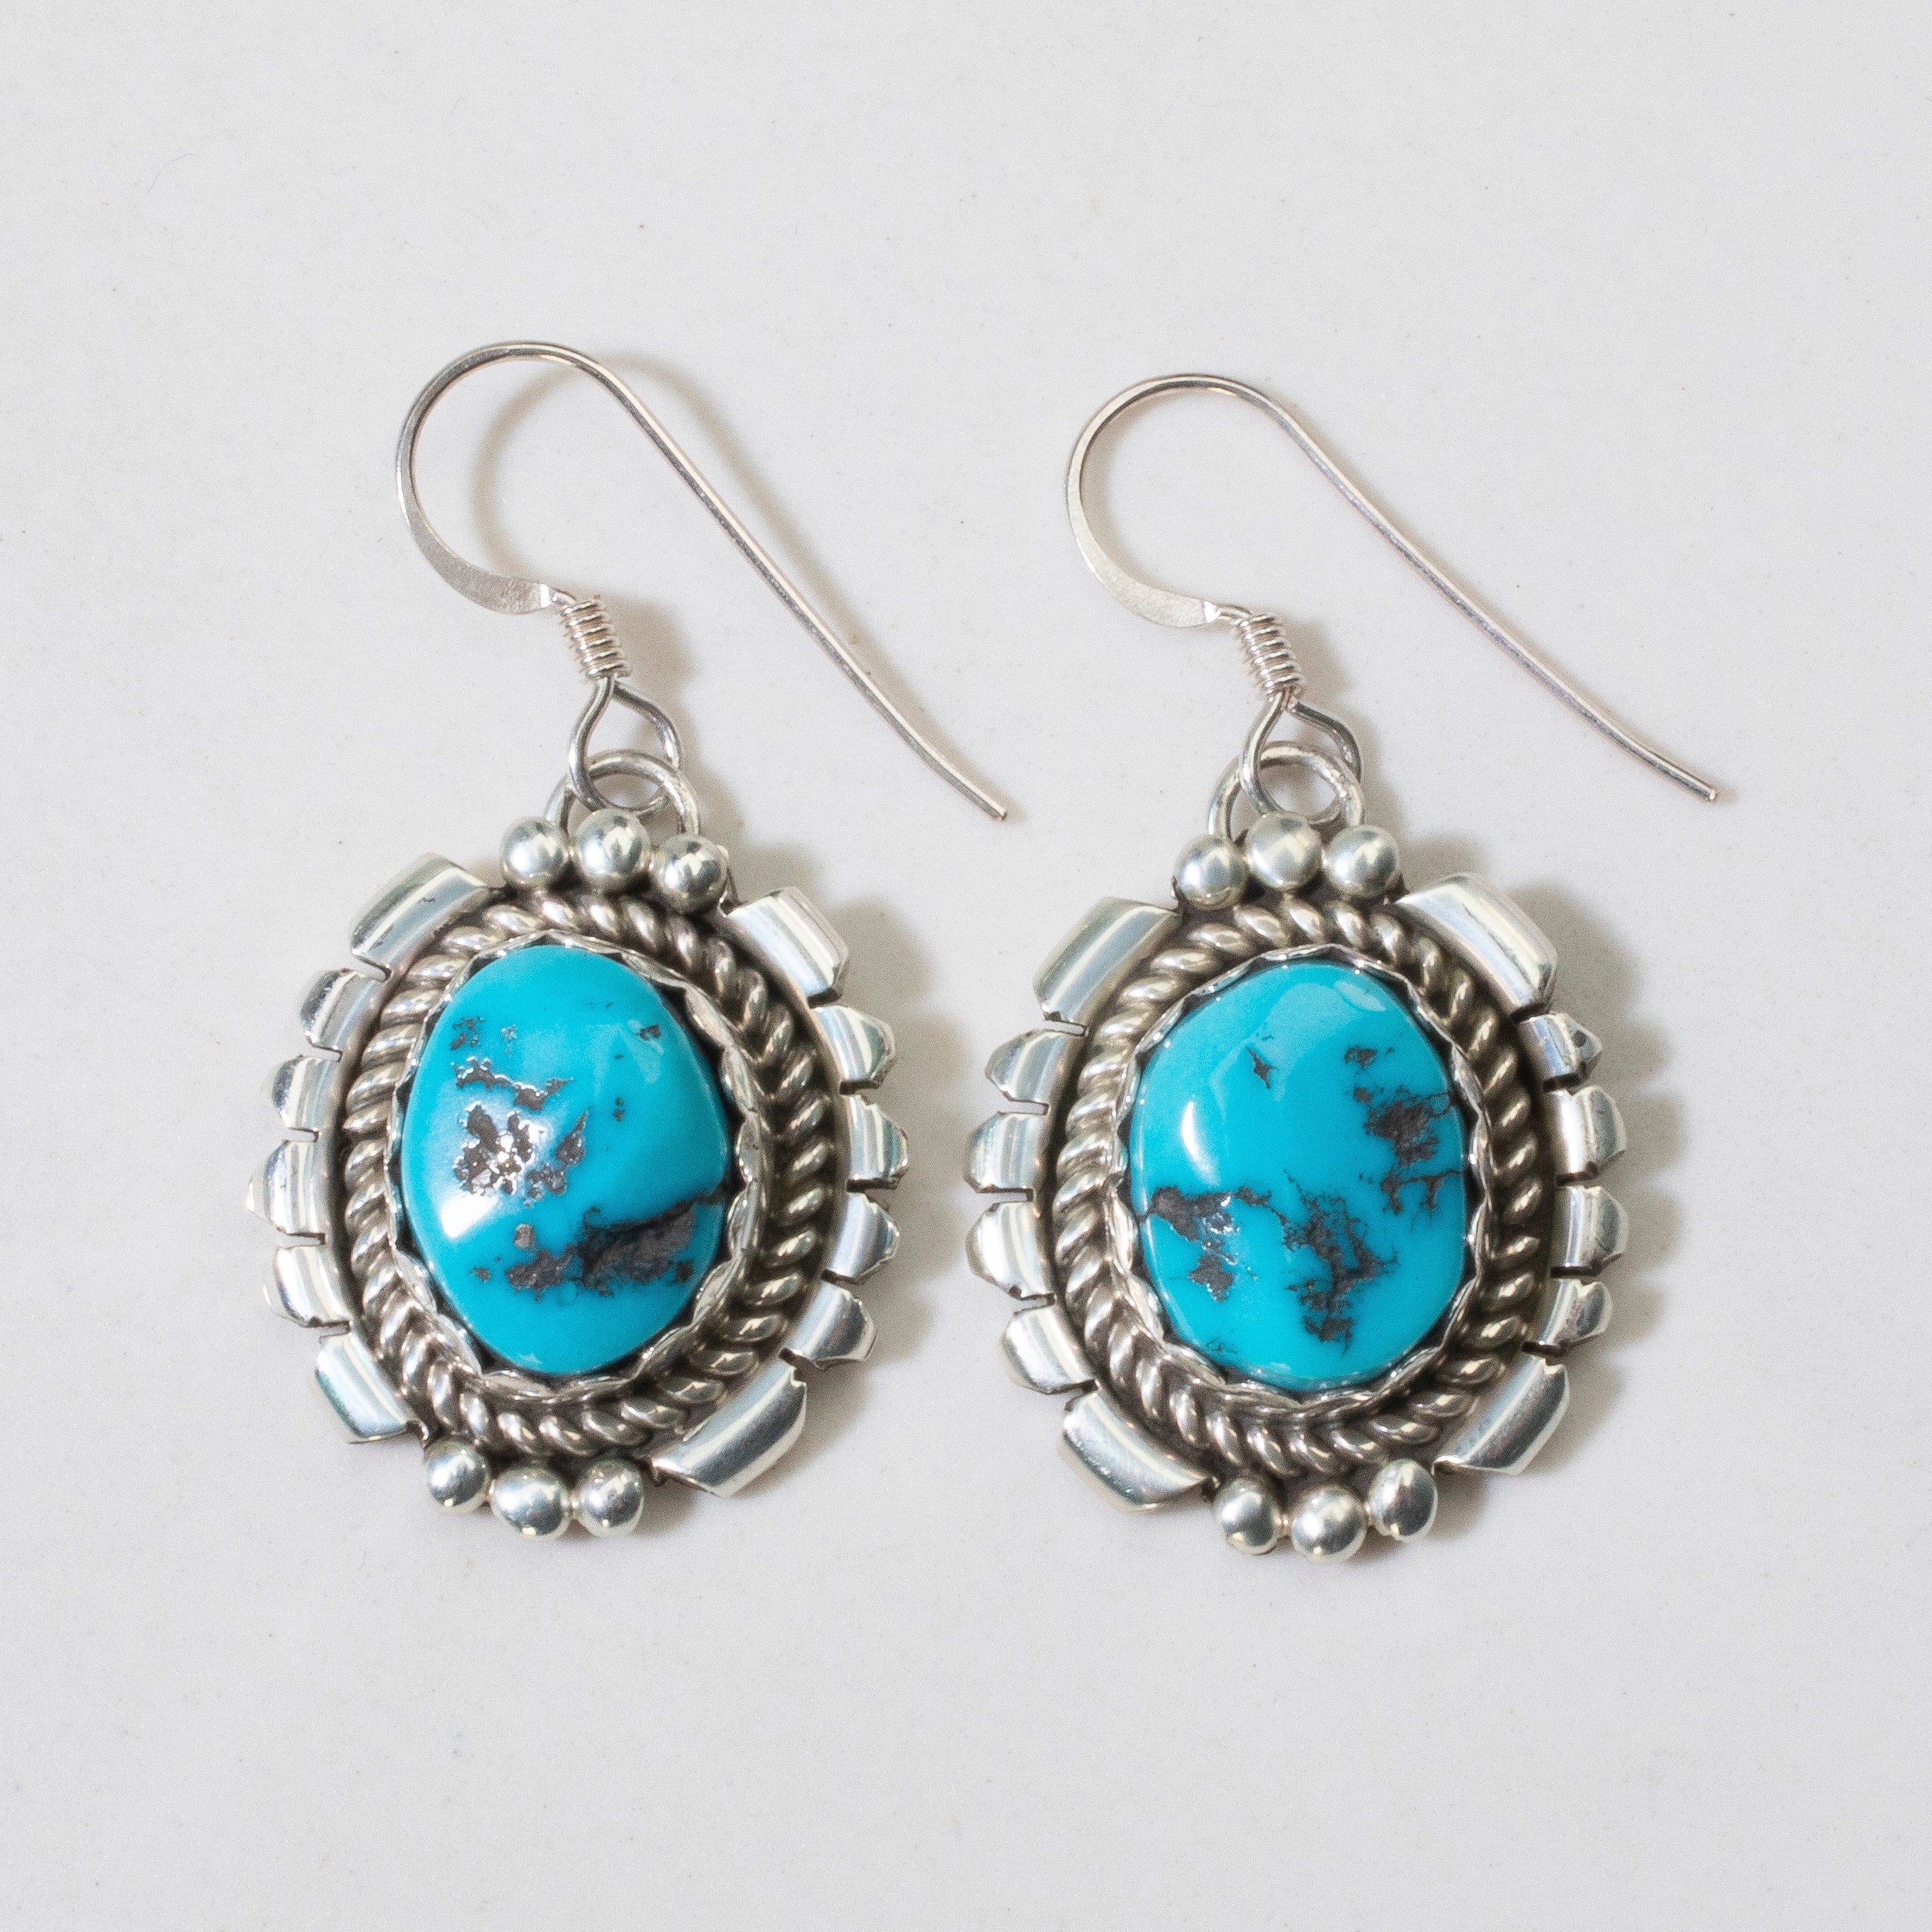 Kalifano Native American Jewelry Sleeping Beauty Turquoise Oval Navajo USA Native American Made 925 Sterling Silver Earrings with French Hook NAE600.018